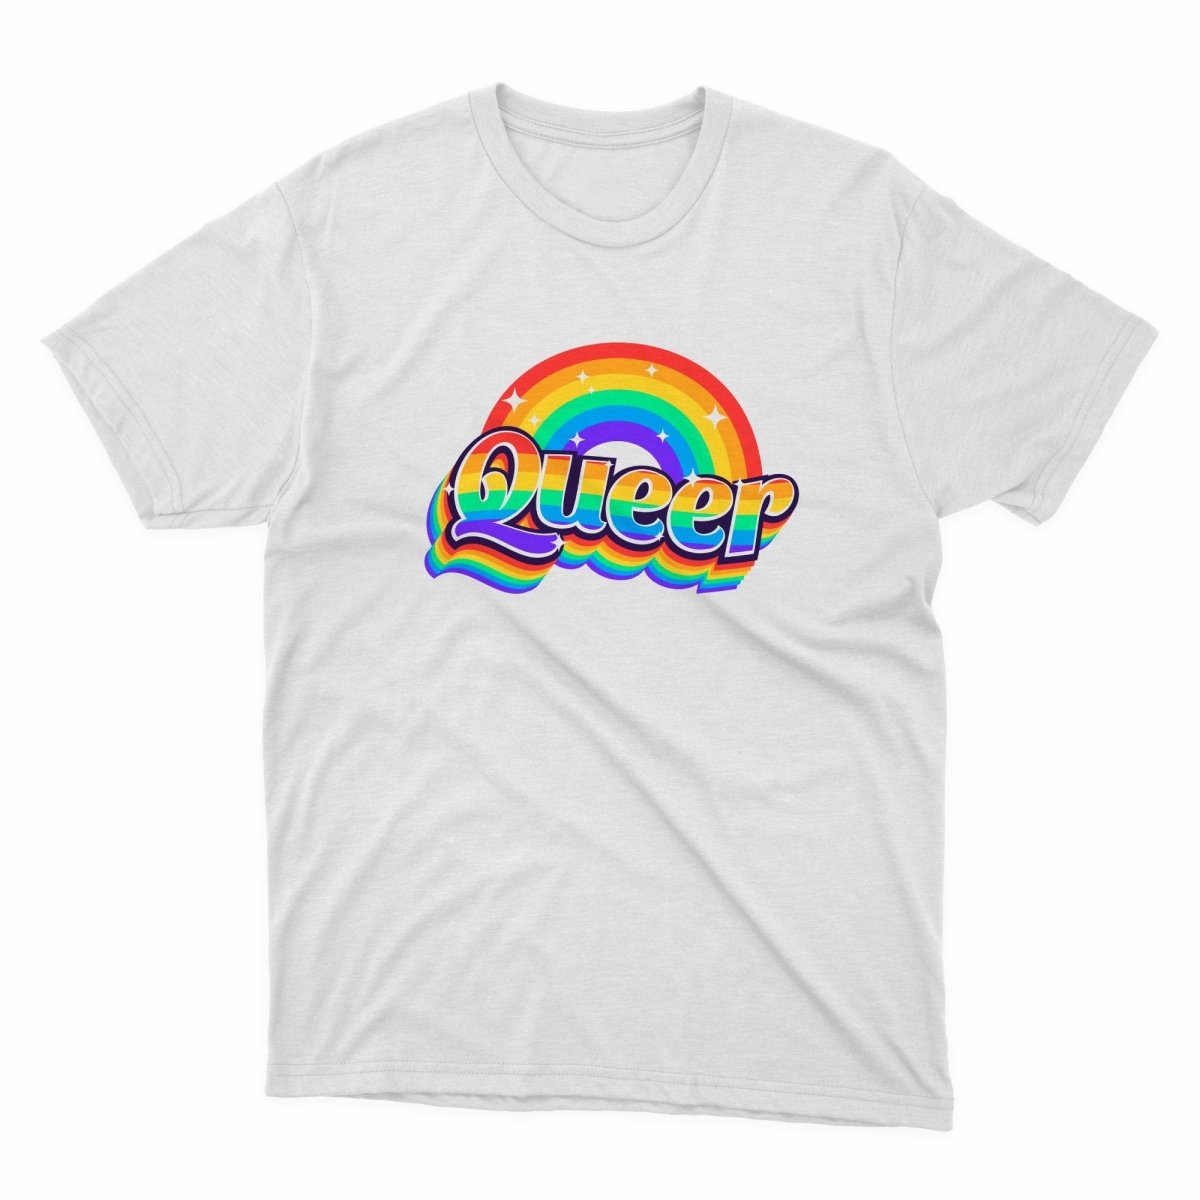 Queer Rainbow Text Shirt - stickerbullQueer Rainbow Text ShirtShirtsPrintifystickerbull20298552294458357084WhiteSa white t - shirt with the word queen in rainbow colors